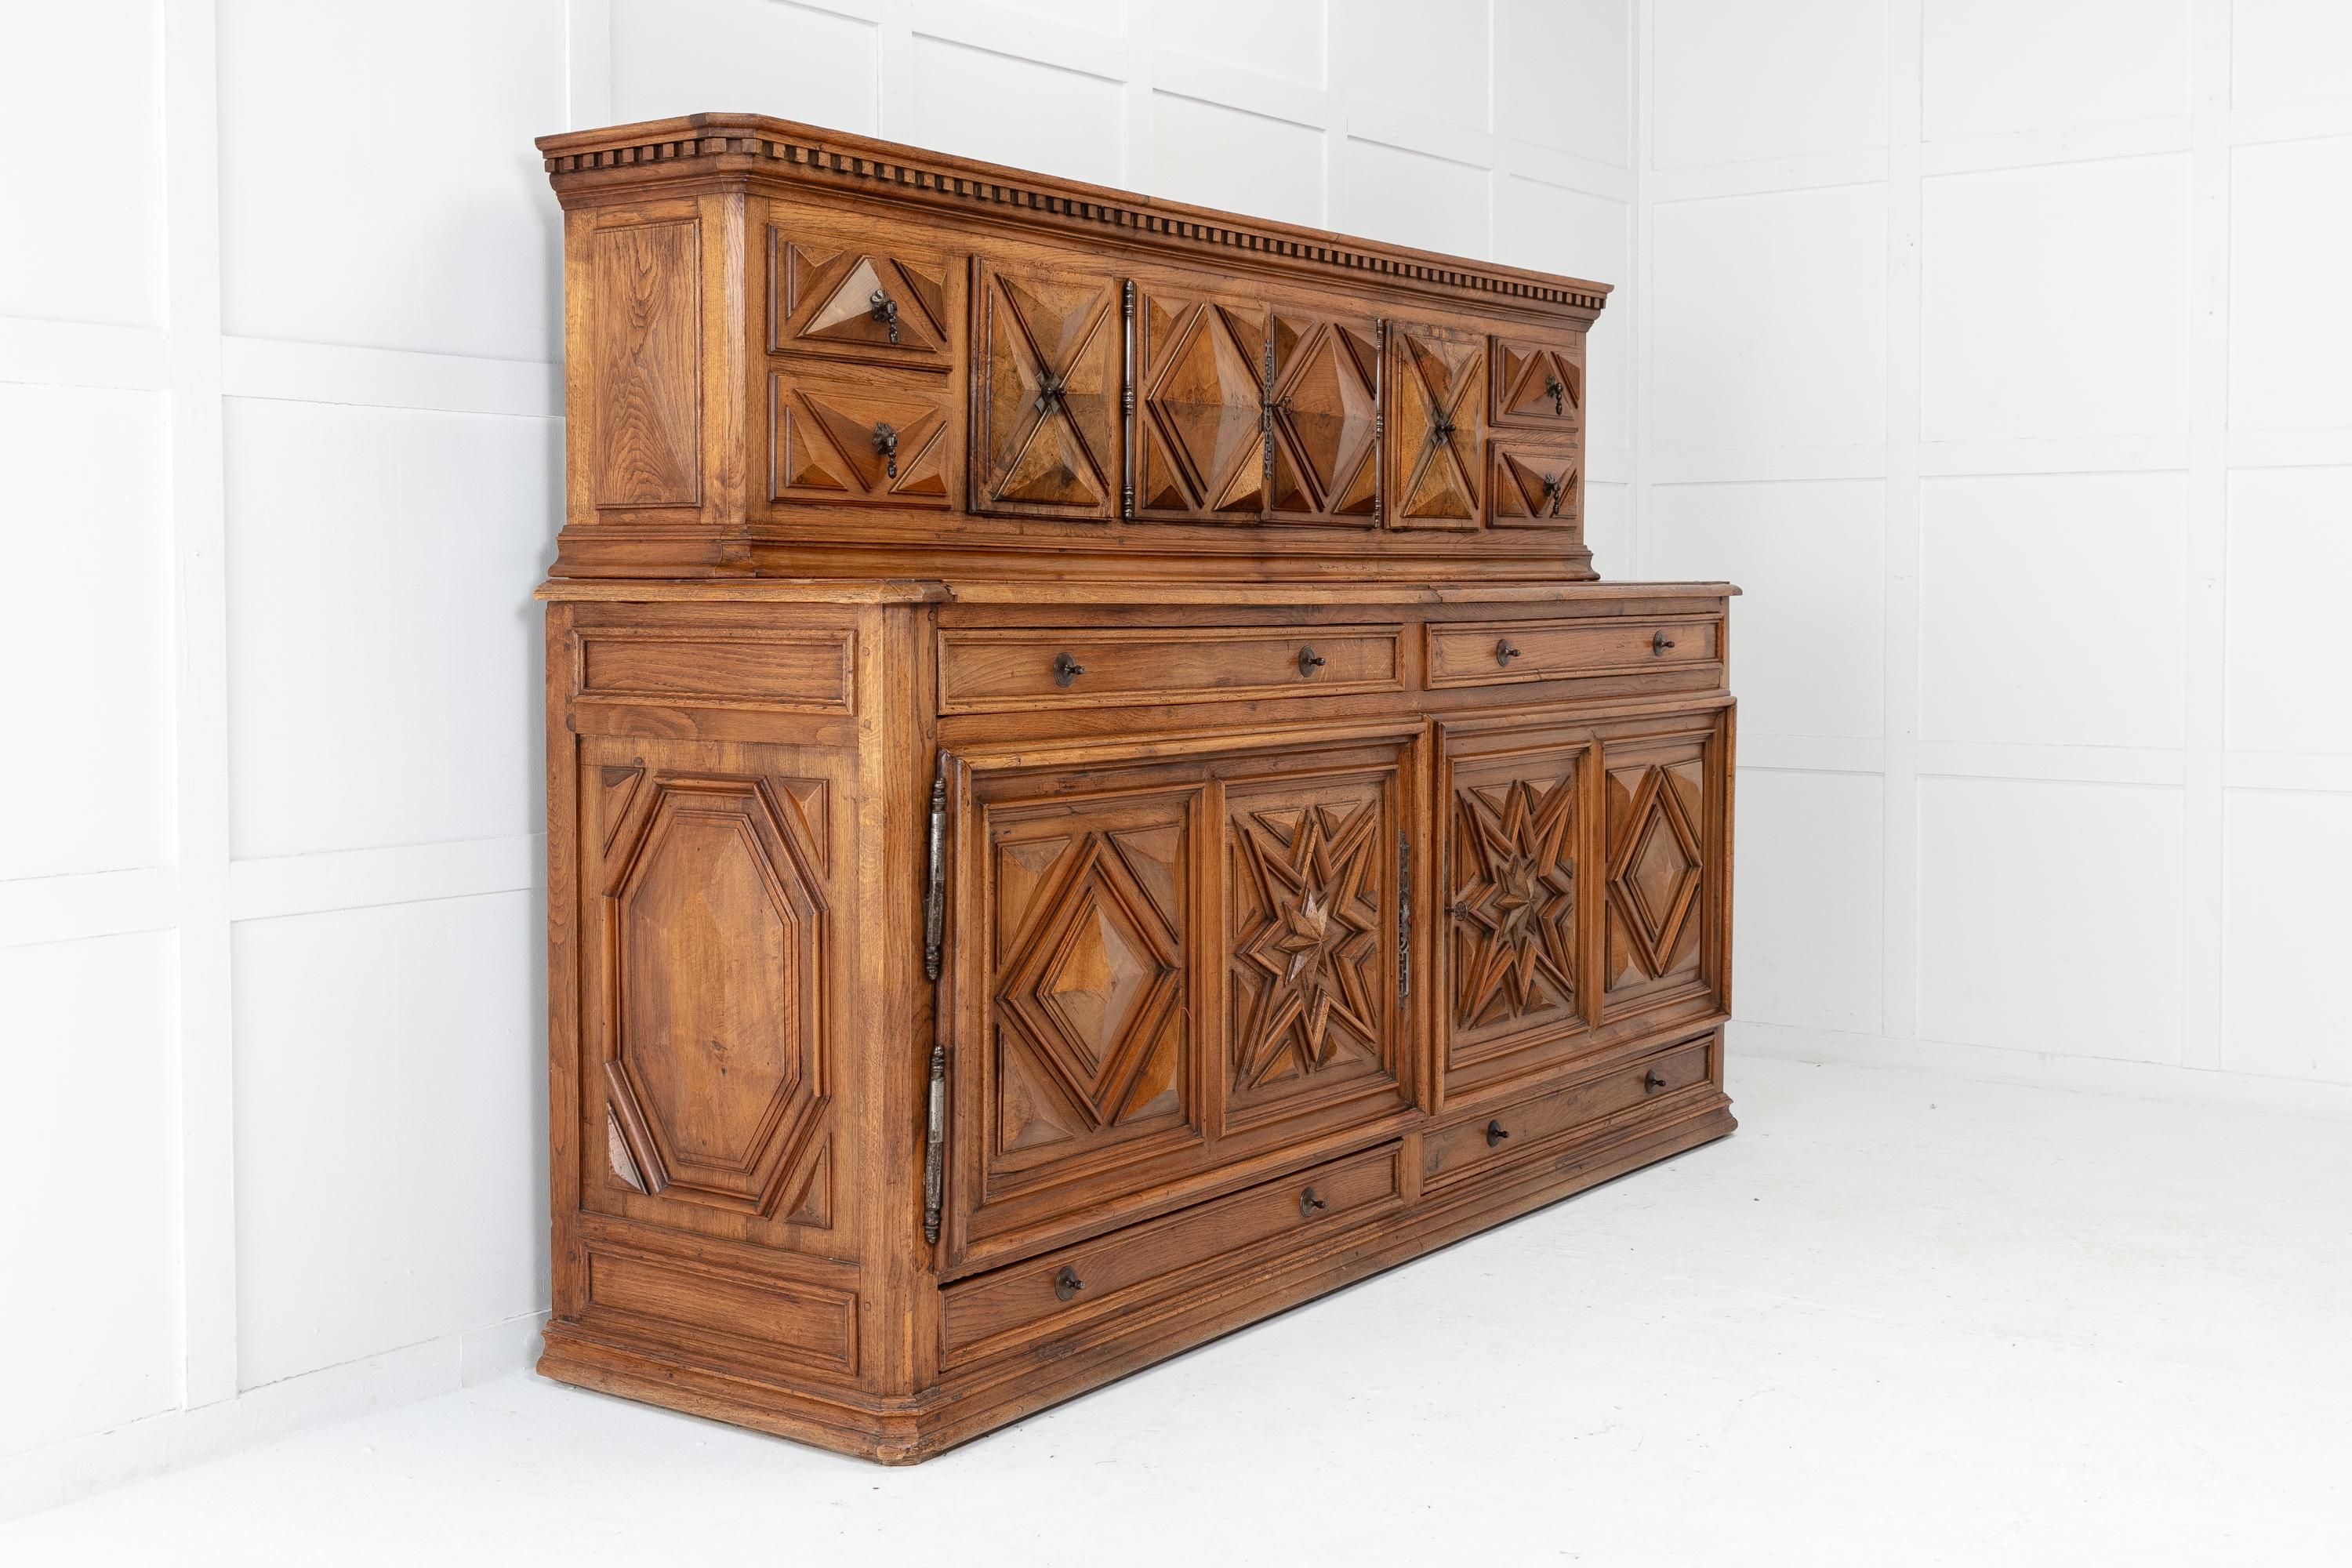 Fabulous, monumental scale 19th century French walnut and oak buffet. The top has a dentil moulded cornice with cupboards and drawers below having extensively raised carvings and original metalwork. Across the top half of the buffet is an